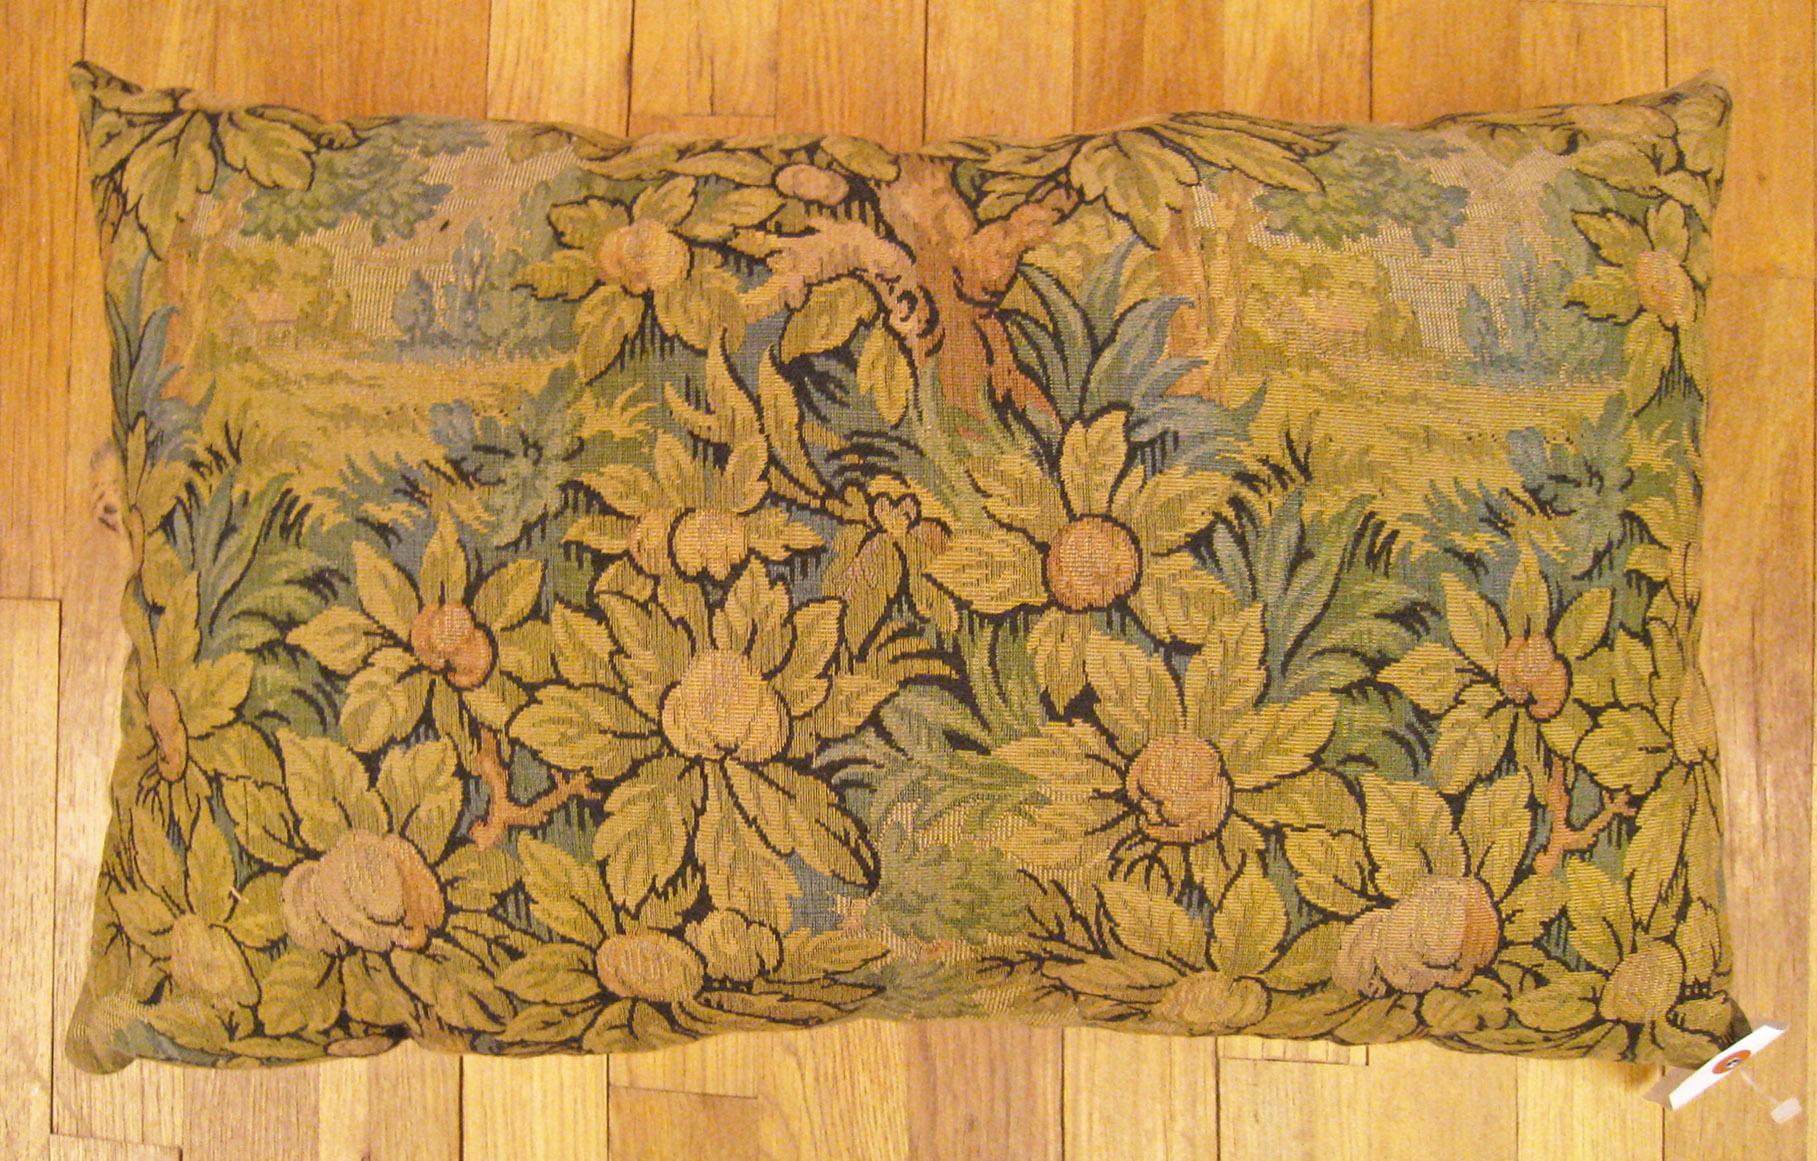 Antique Jacquard Tapestry Pillow; size 1'2” x 2'0”.

An antique decorative pillow with trees allover a green central field, size 1'2